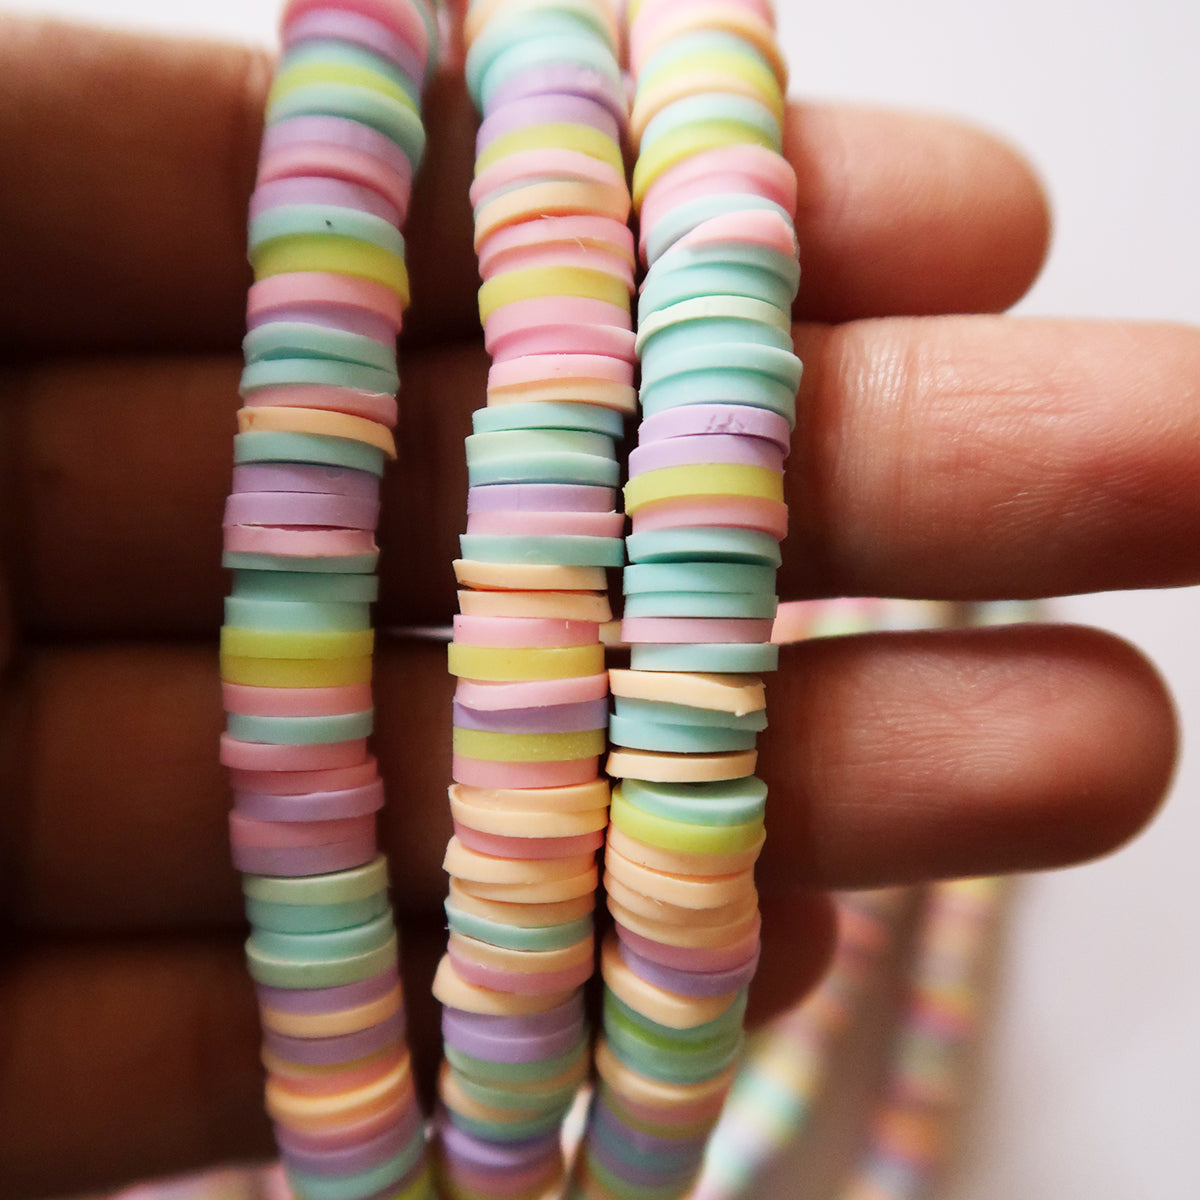 Polymer Clay Beads - S.A.L. Members